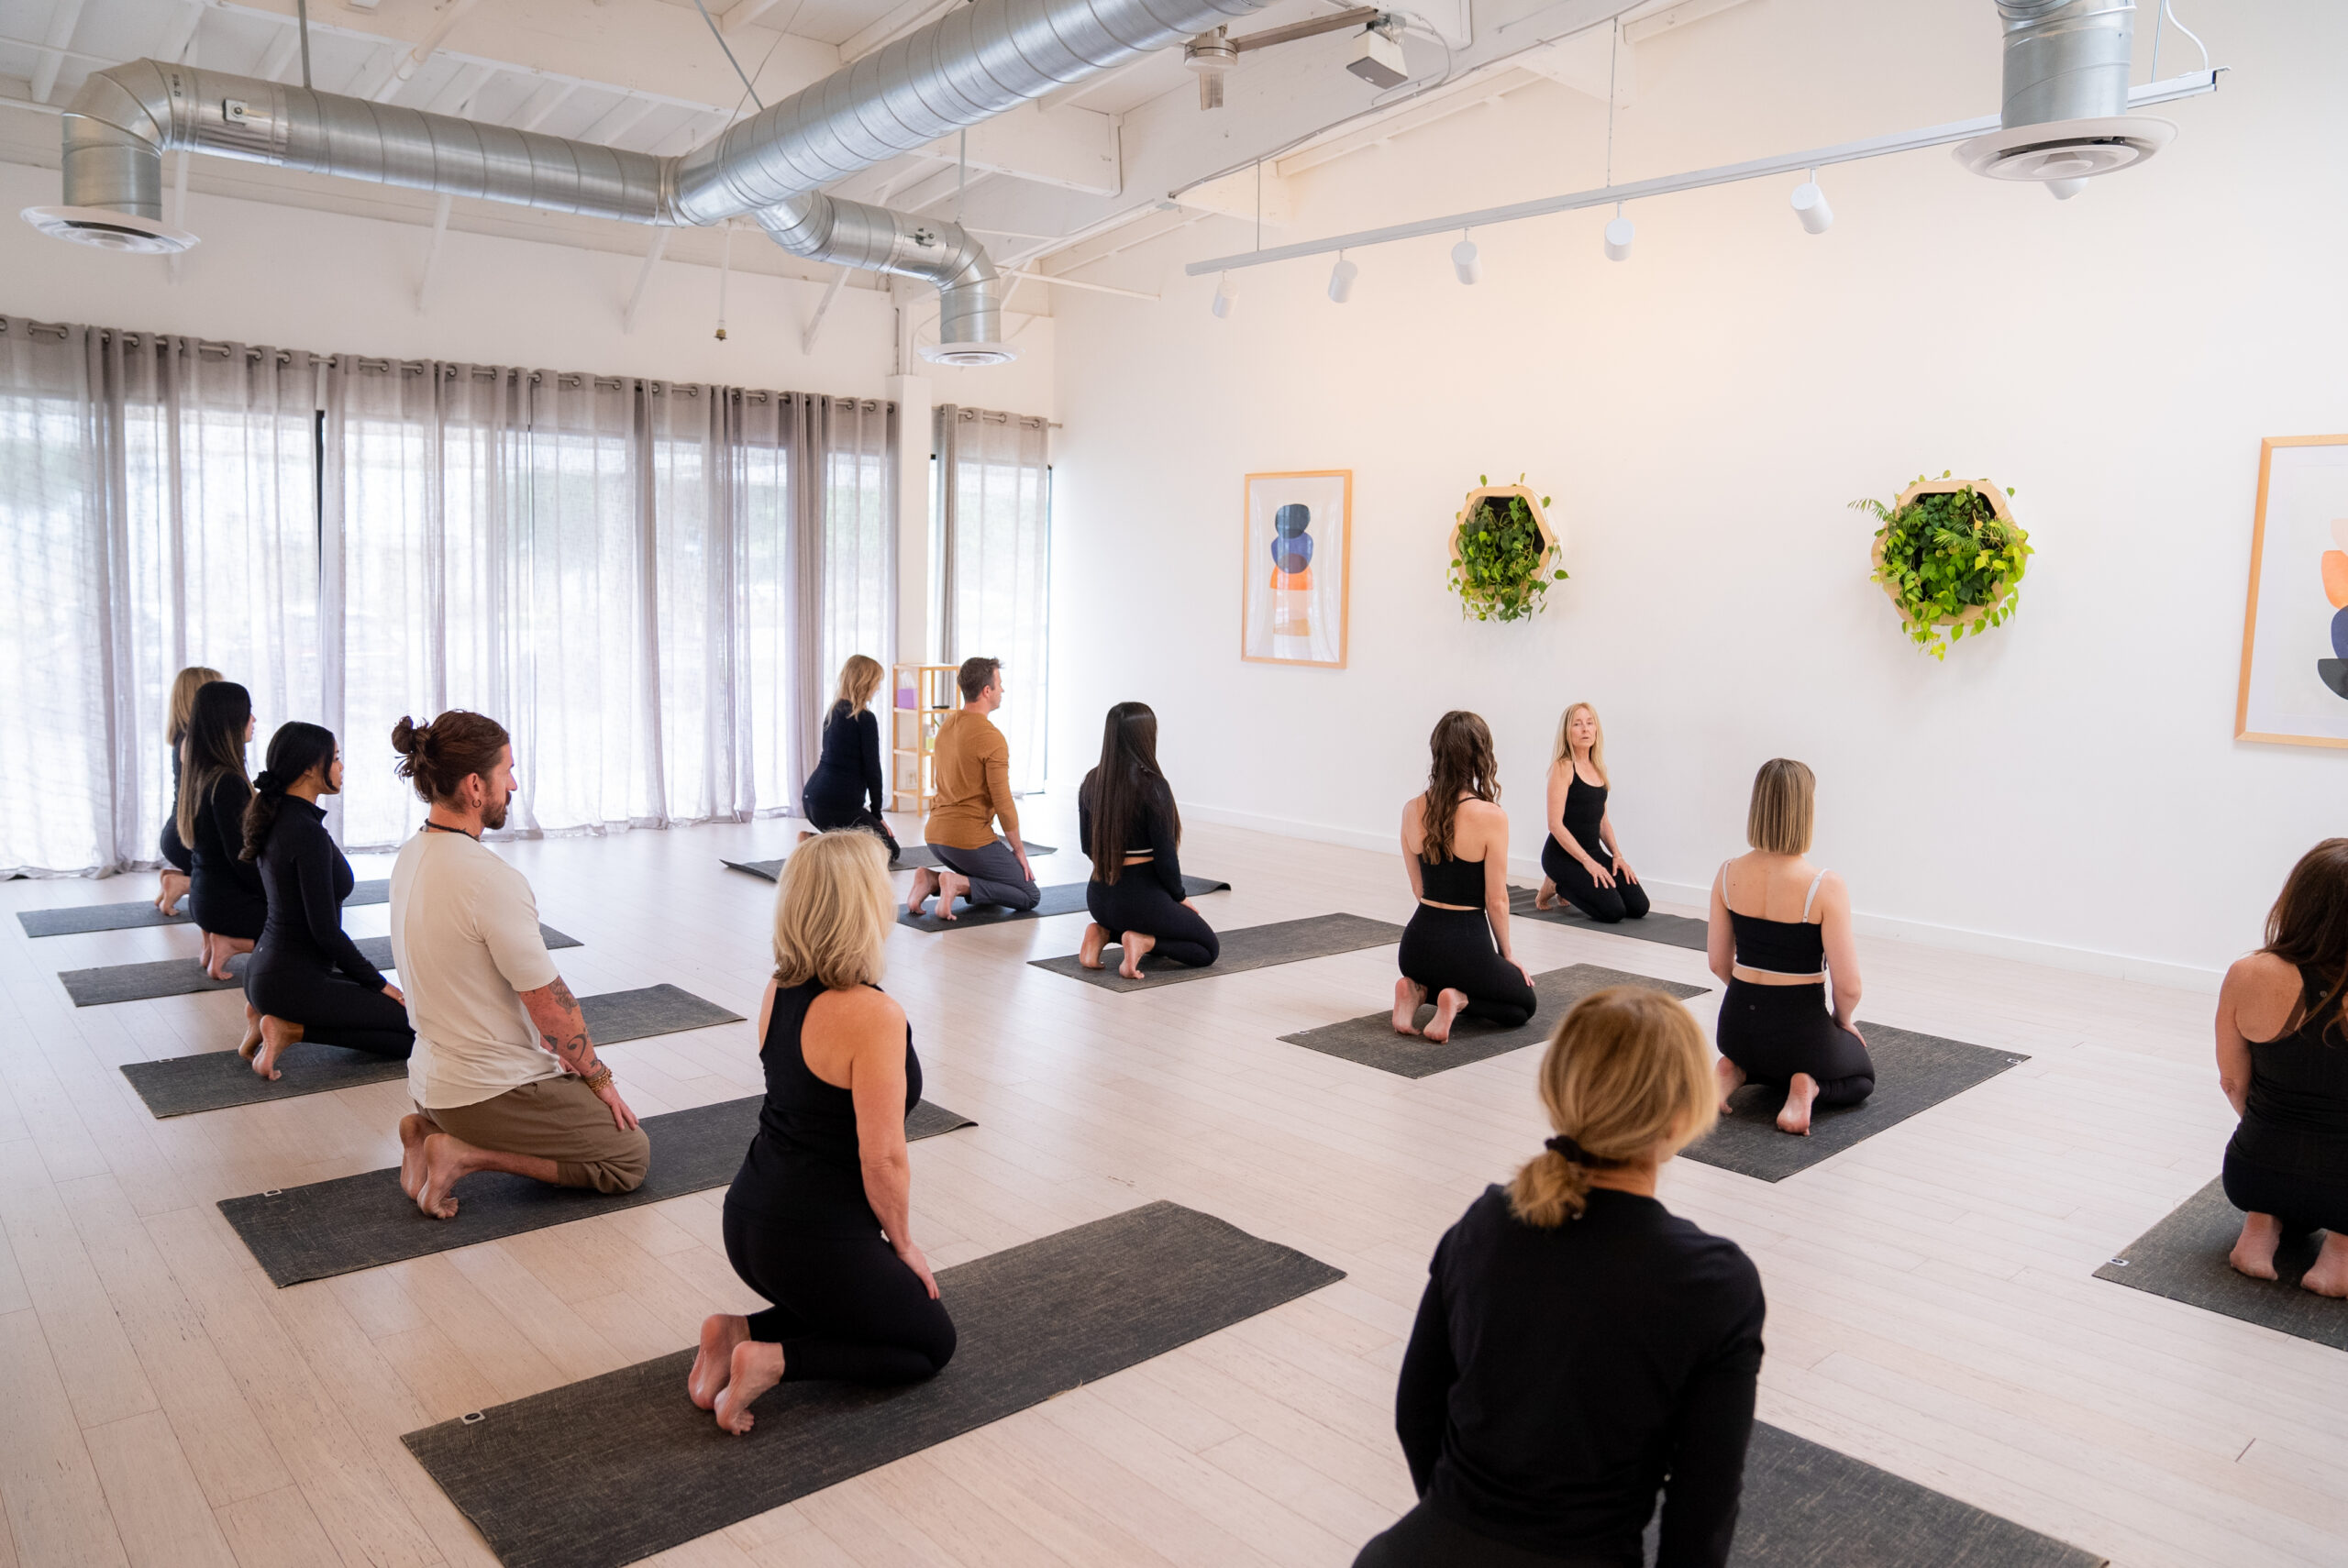 LiveMetta Pilates has offered SoCal Residents a safe space to practice mindful movement & a community of like-minded individuals that’s rooted in loving-kindess